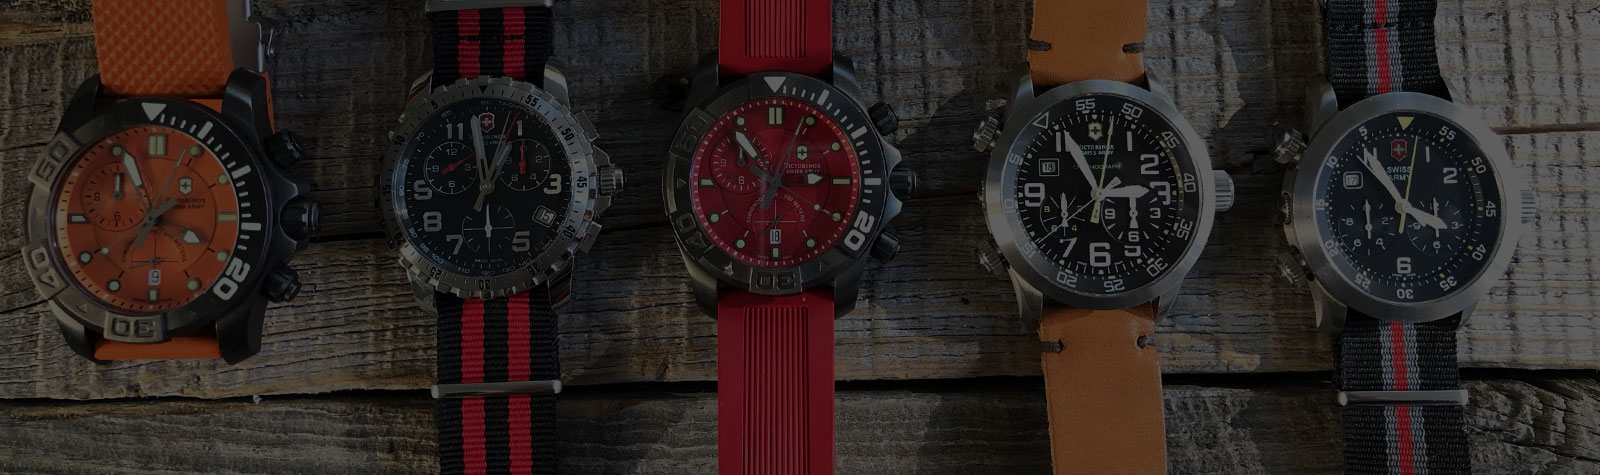 WATCH DESIGN: Victorinox Swiss Army 60/60 Central Minutes Chronographs